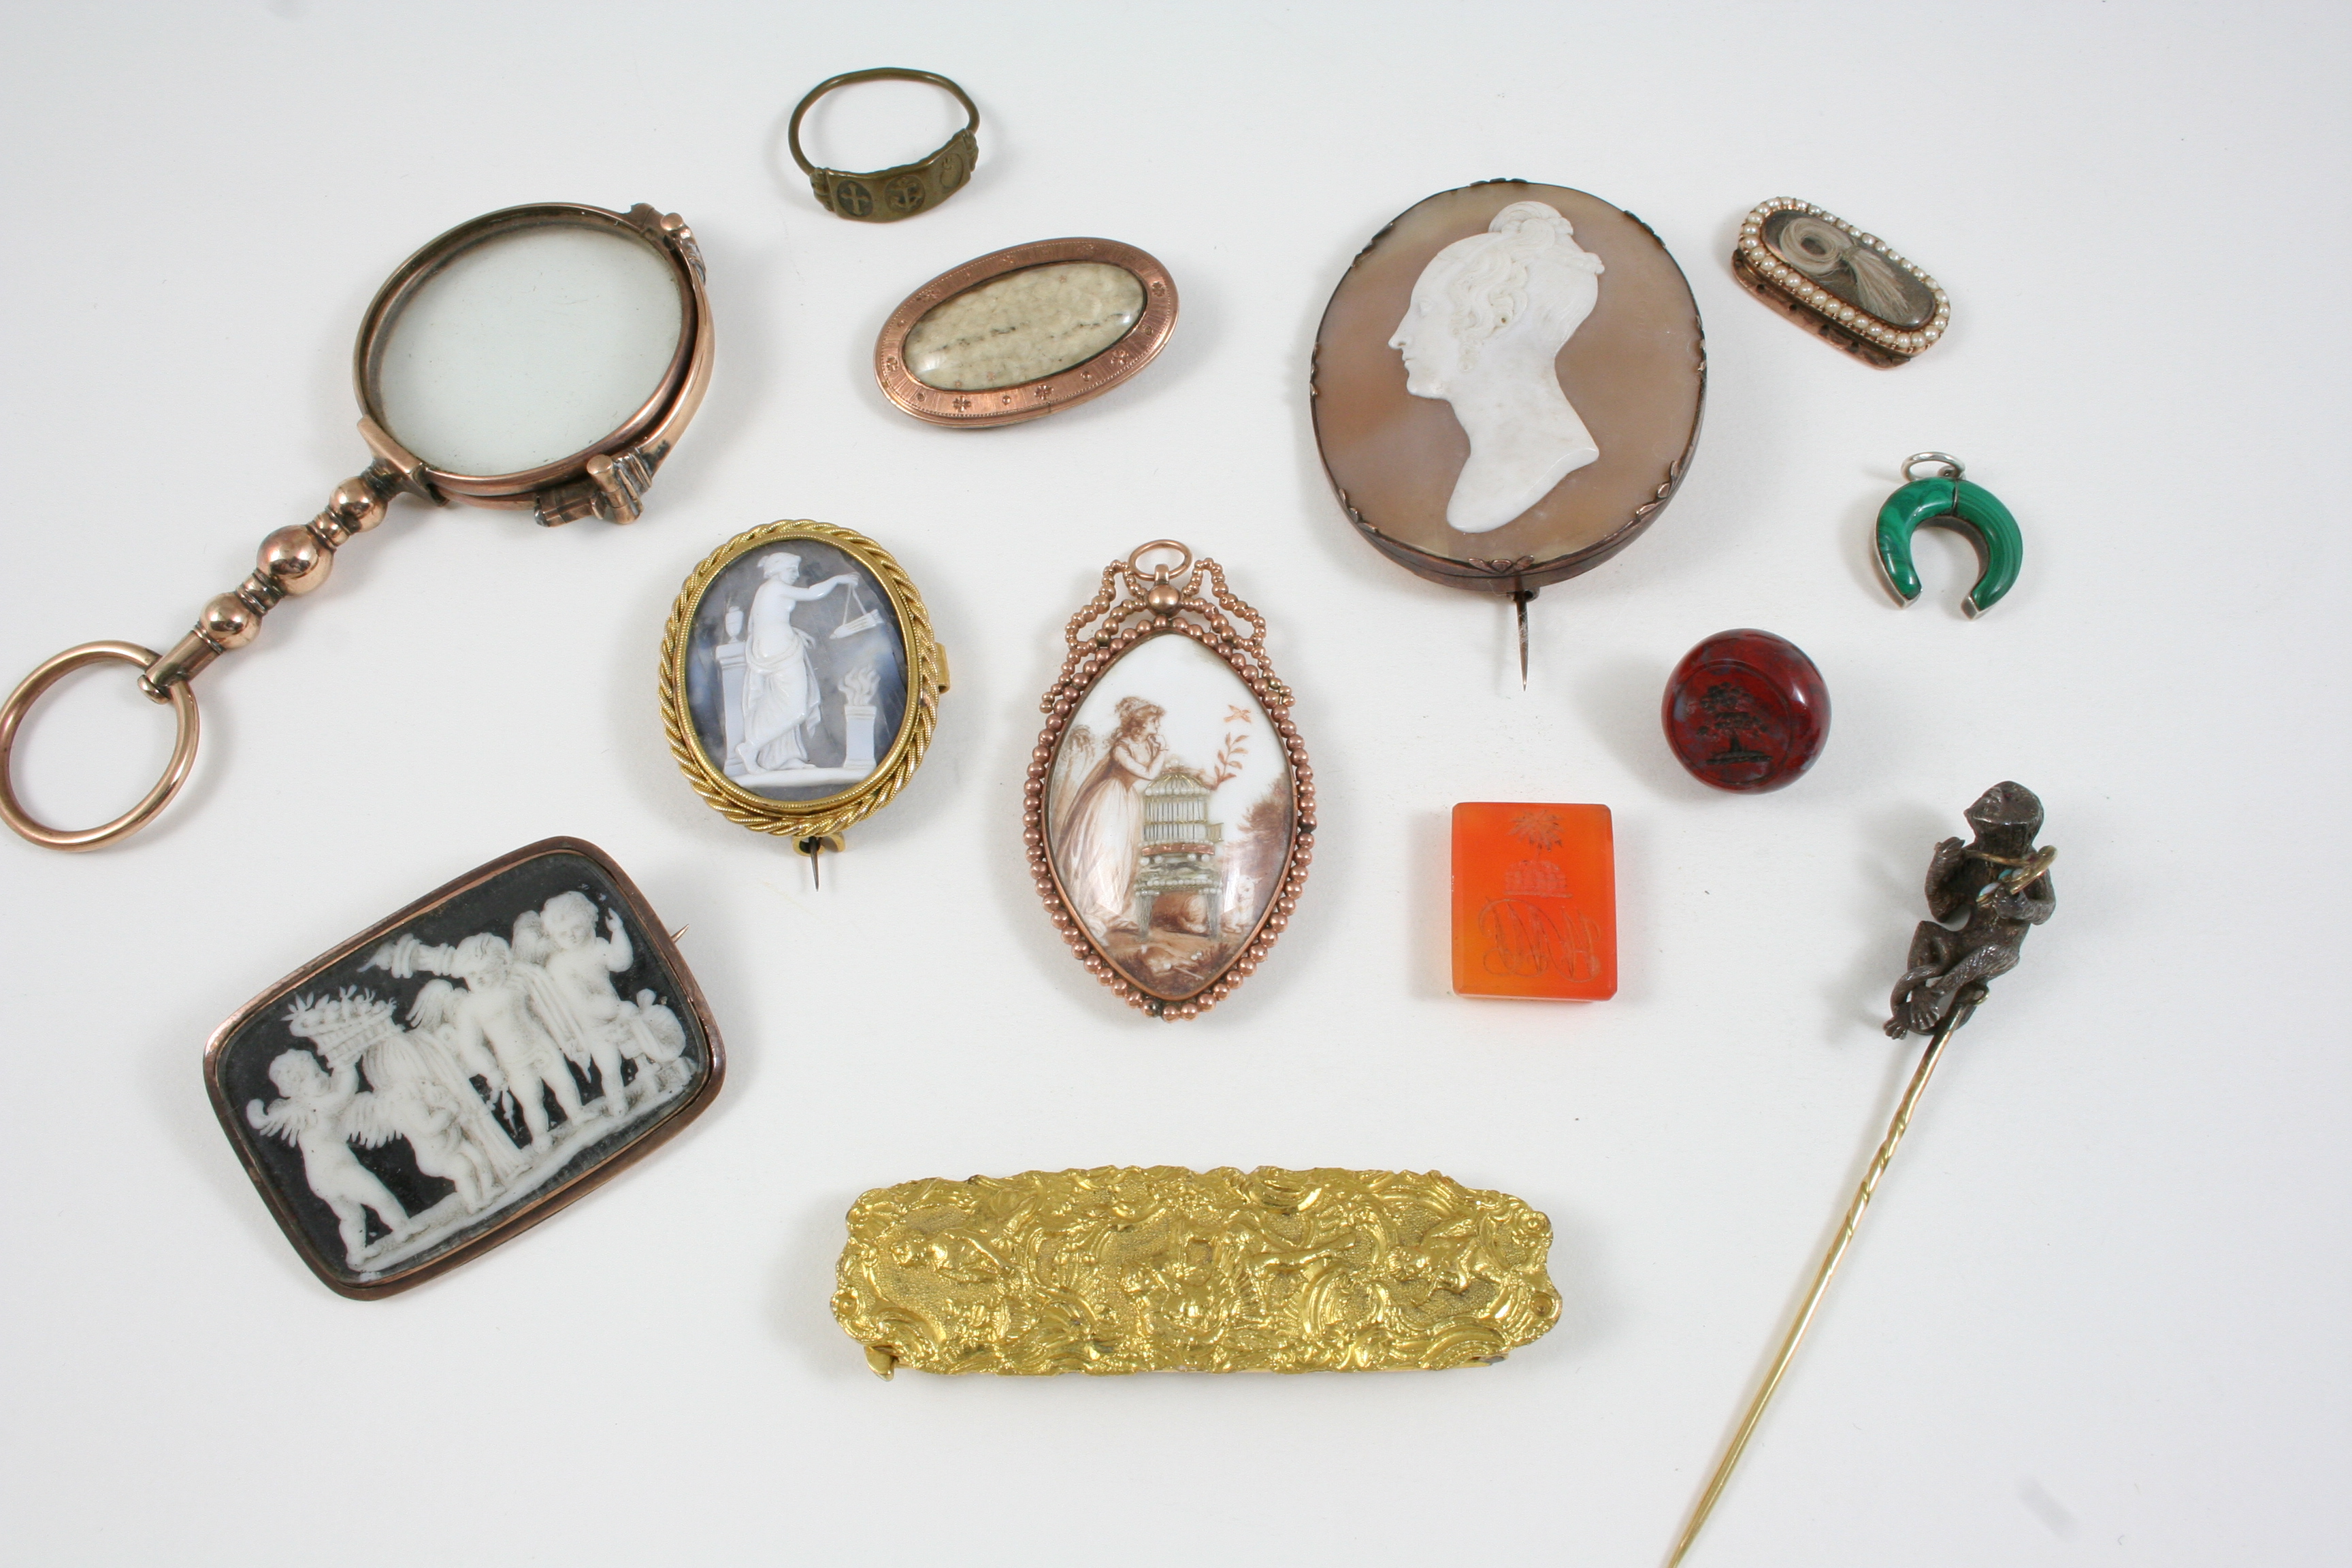 A QUANTITY OF JEWELLERY including a hardstone cameo brooch, depicting a classical scene, a Victorian